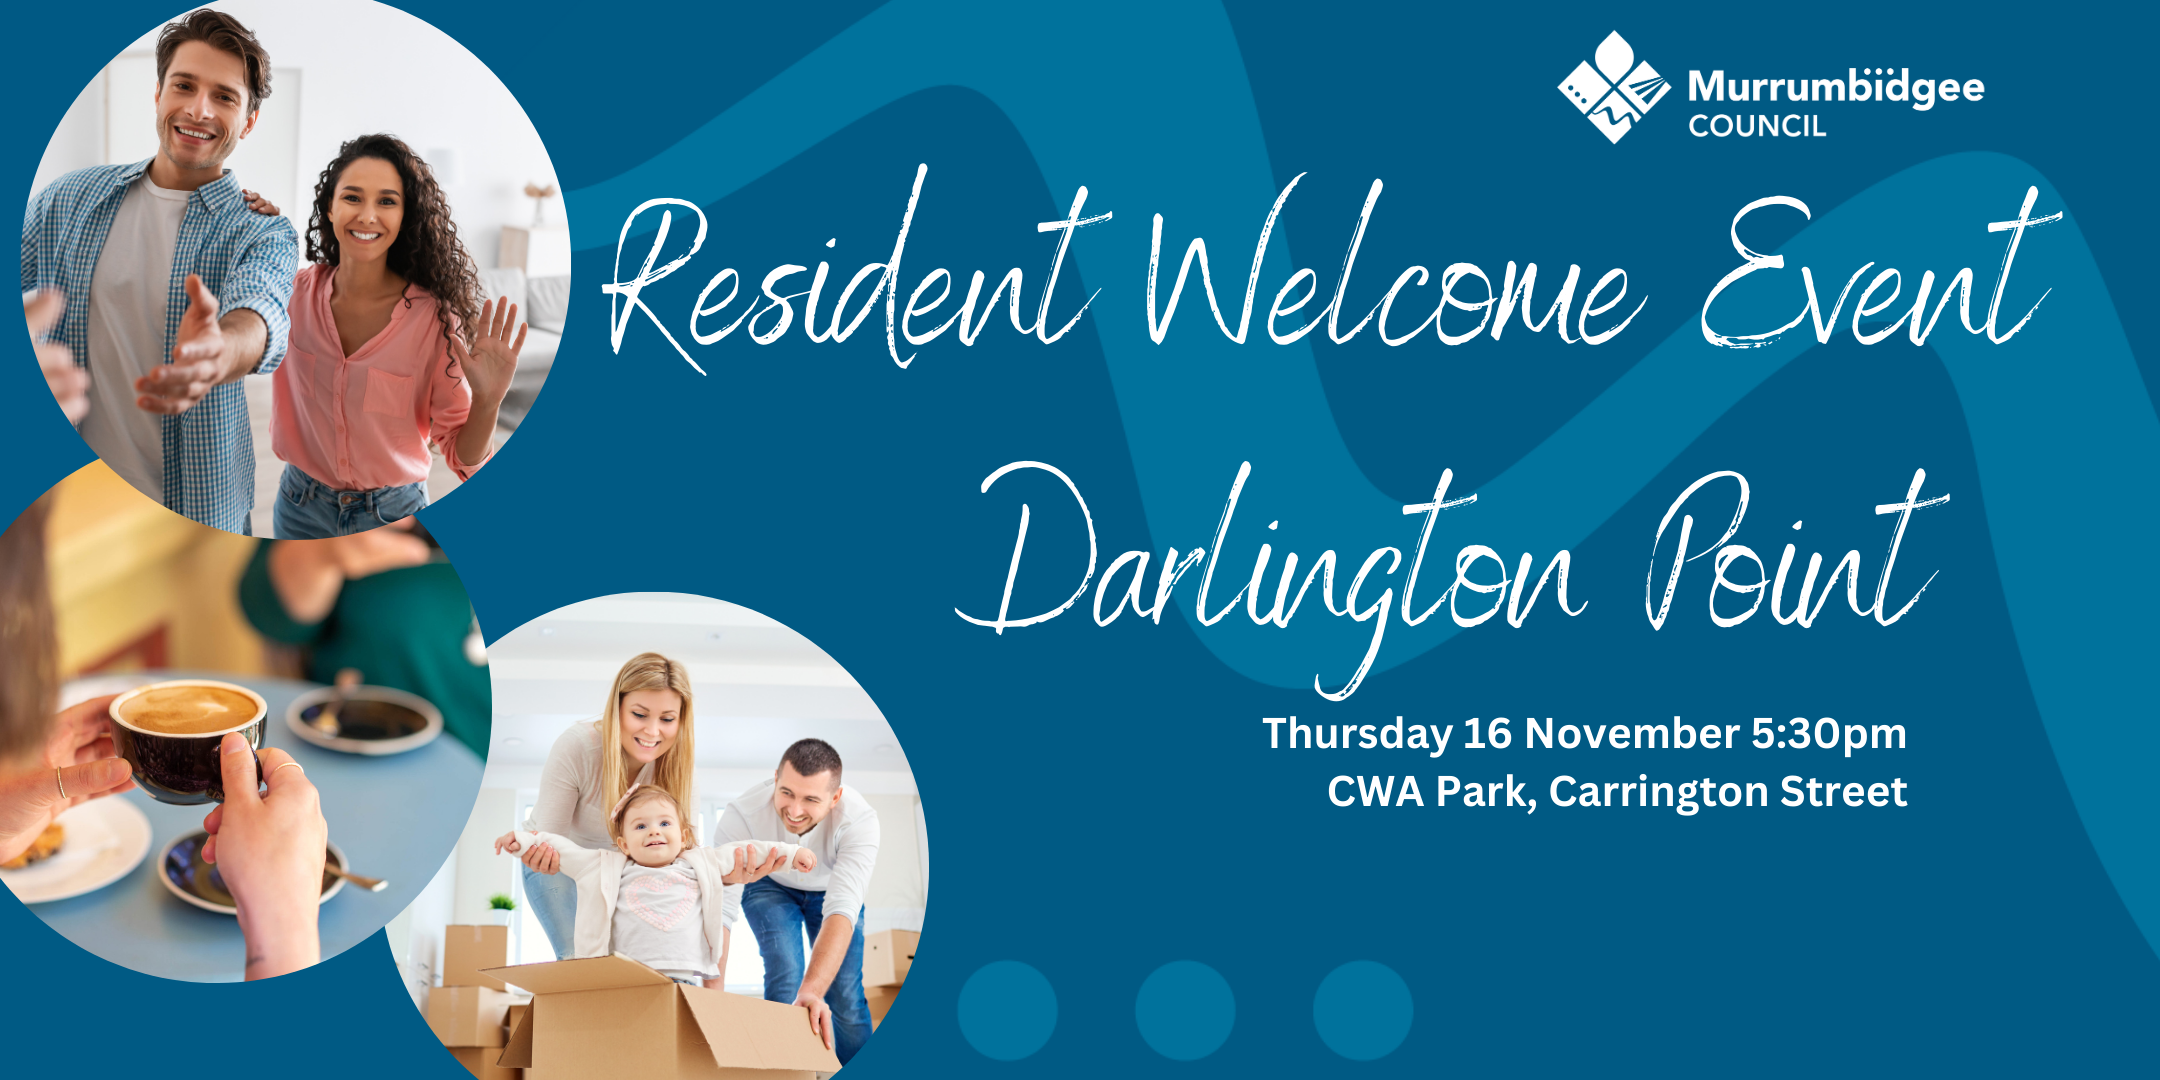 Darlington Point - New Resident Welcome Event